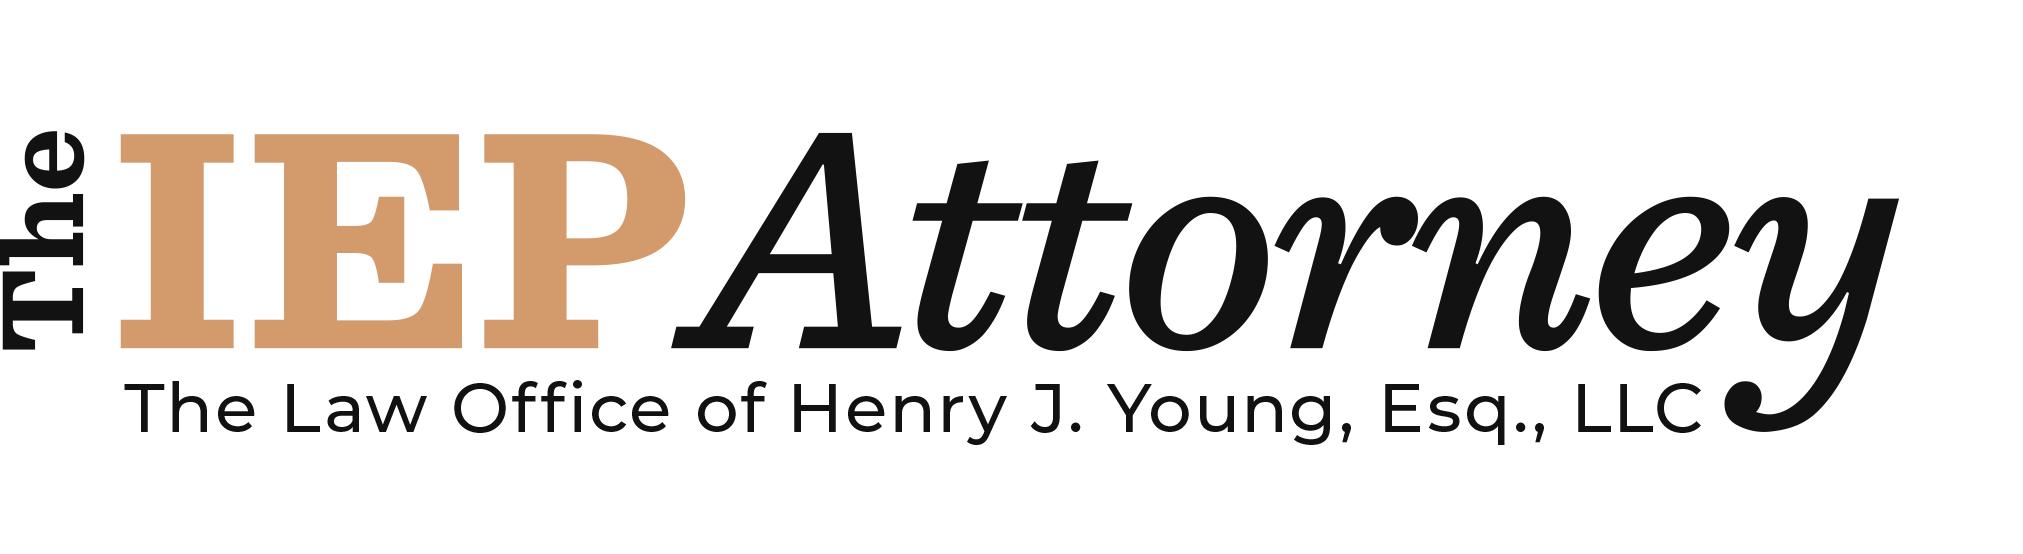 The Law Office of Henry J. Young, Esq., LLC | 5 Great Valley Pkwy Suite 210, Malvern, PA 19355, United States | Phone: (484) 212-1763